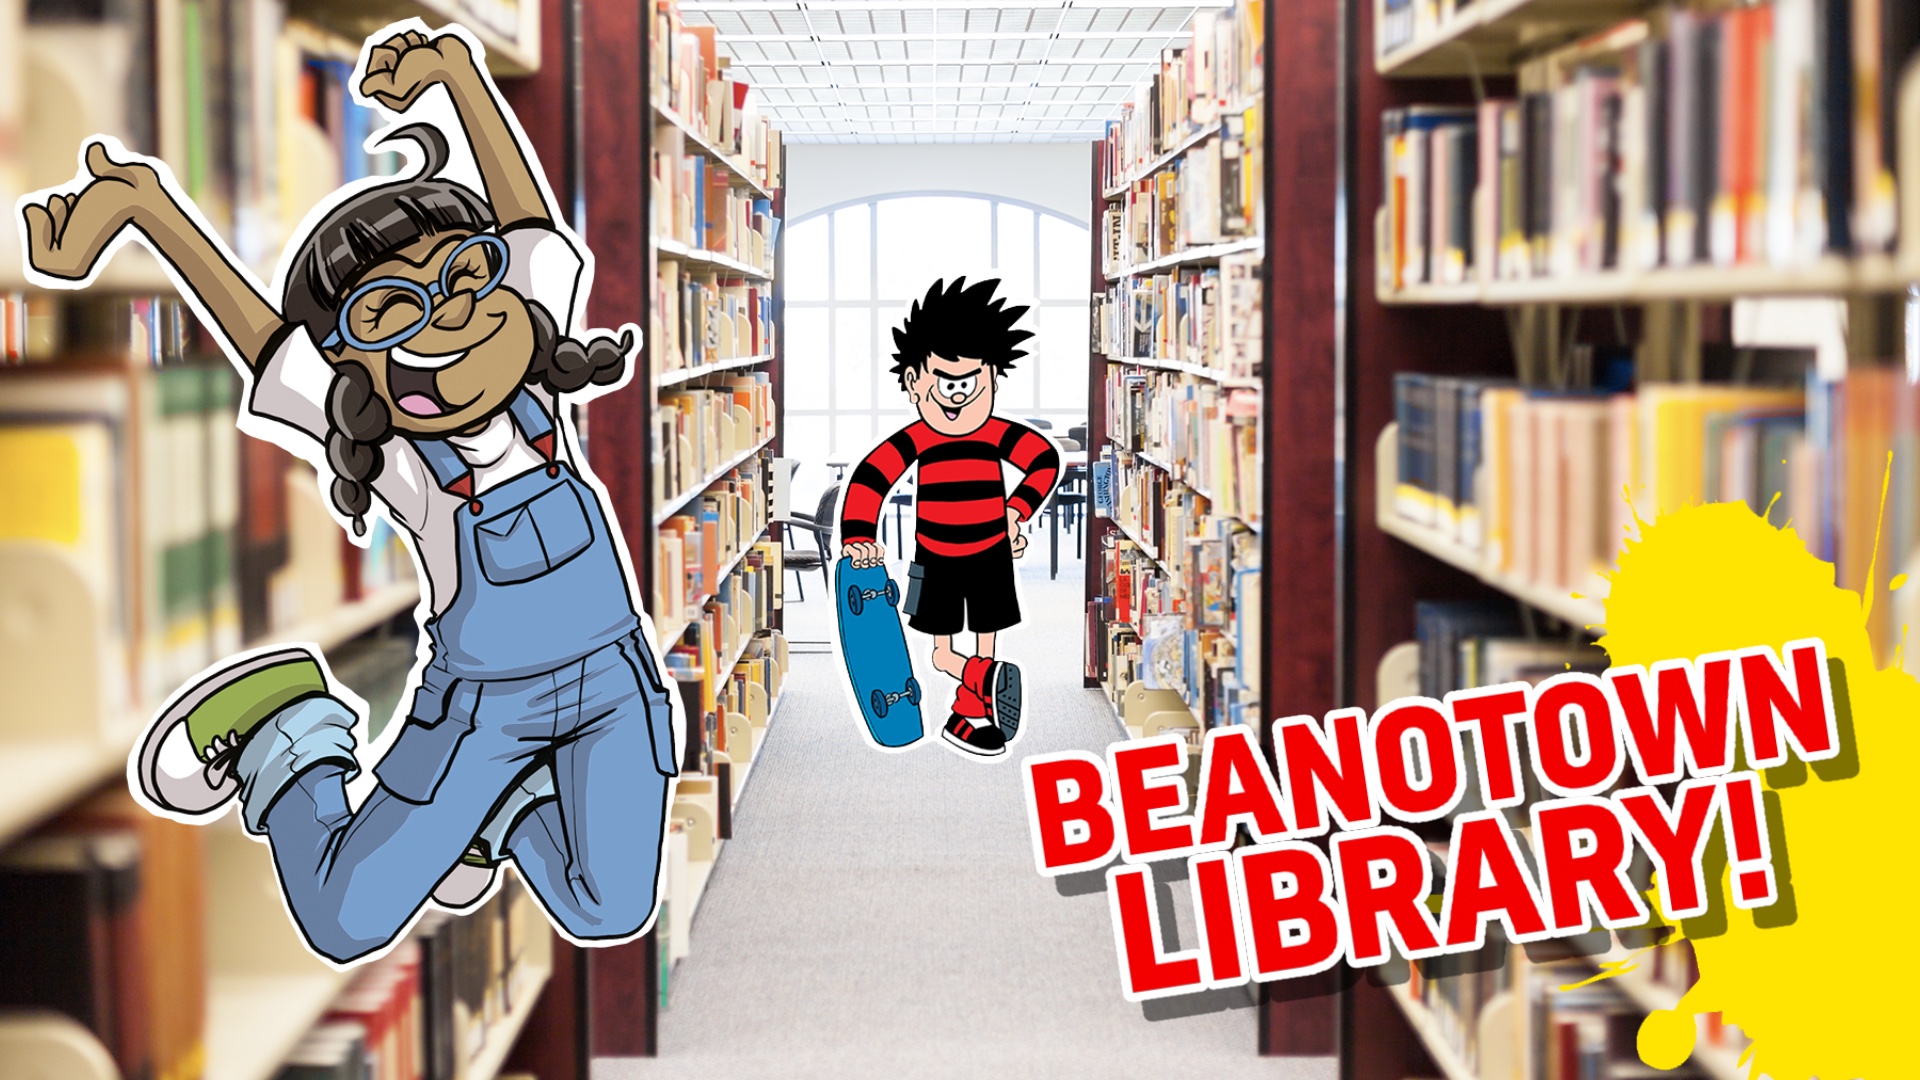 Harsha and Dennis in Beanotown Library